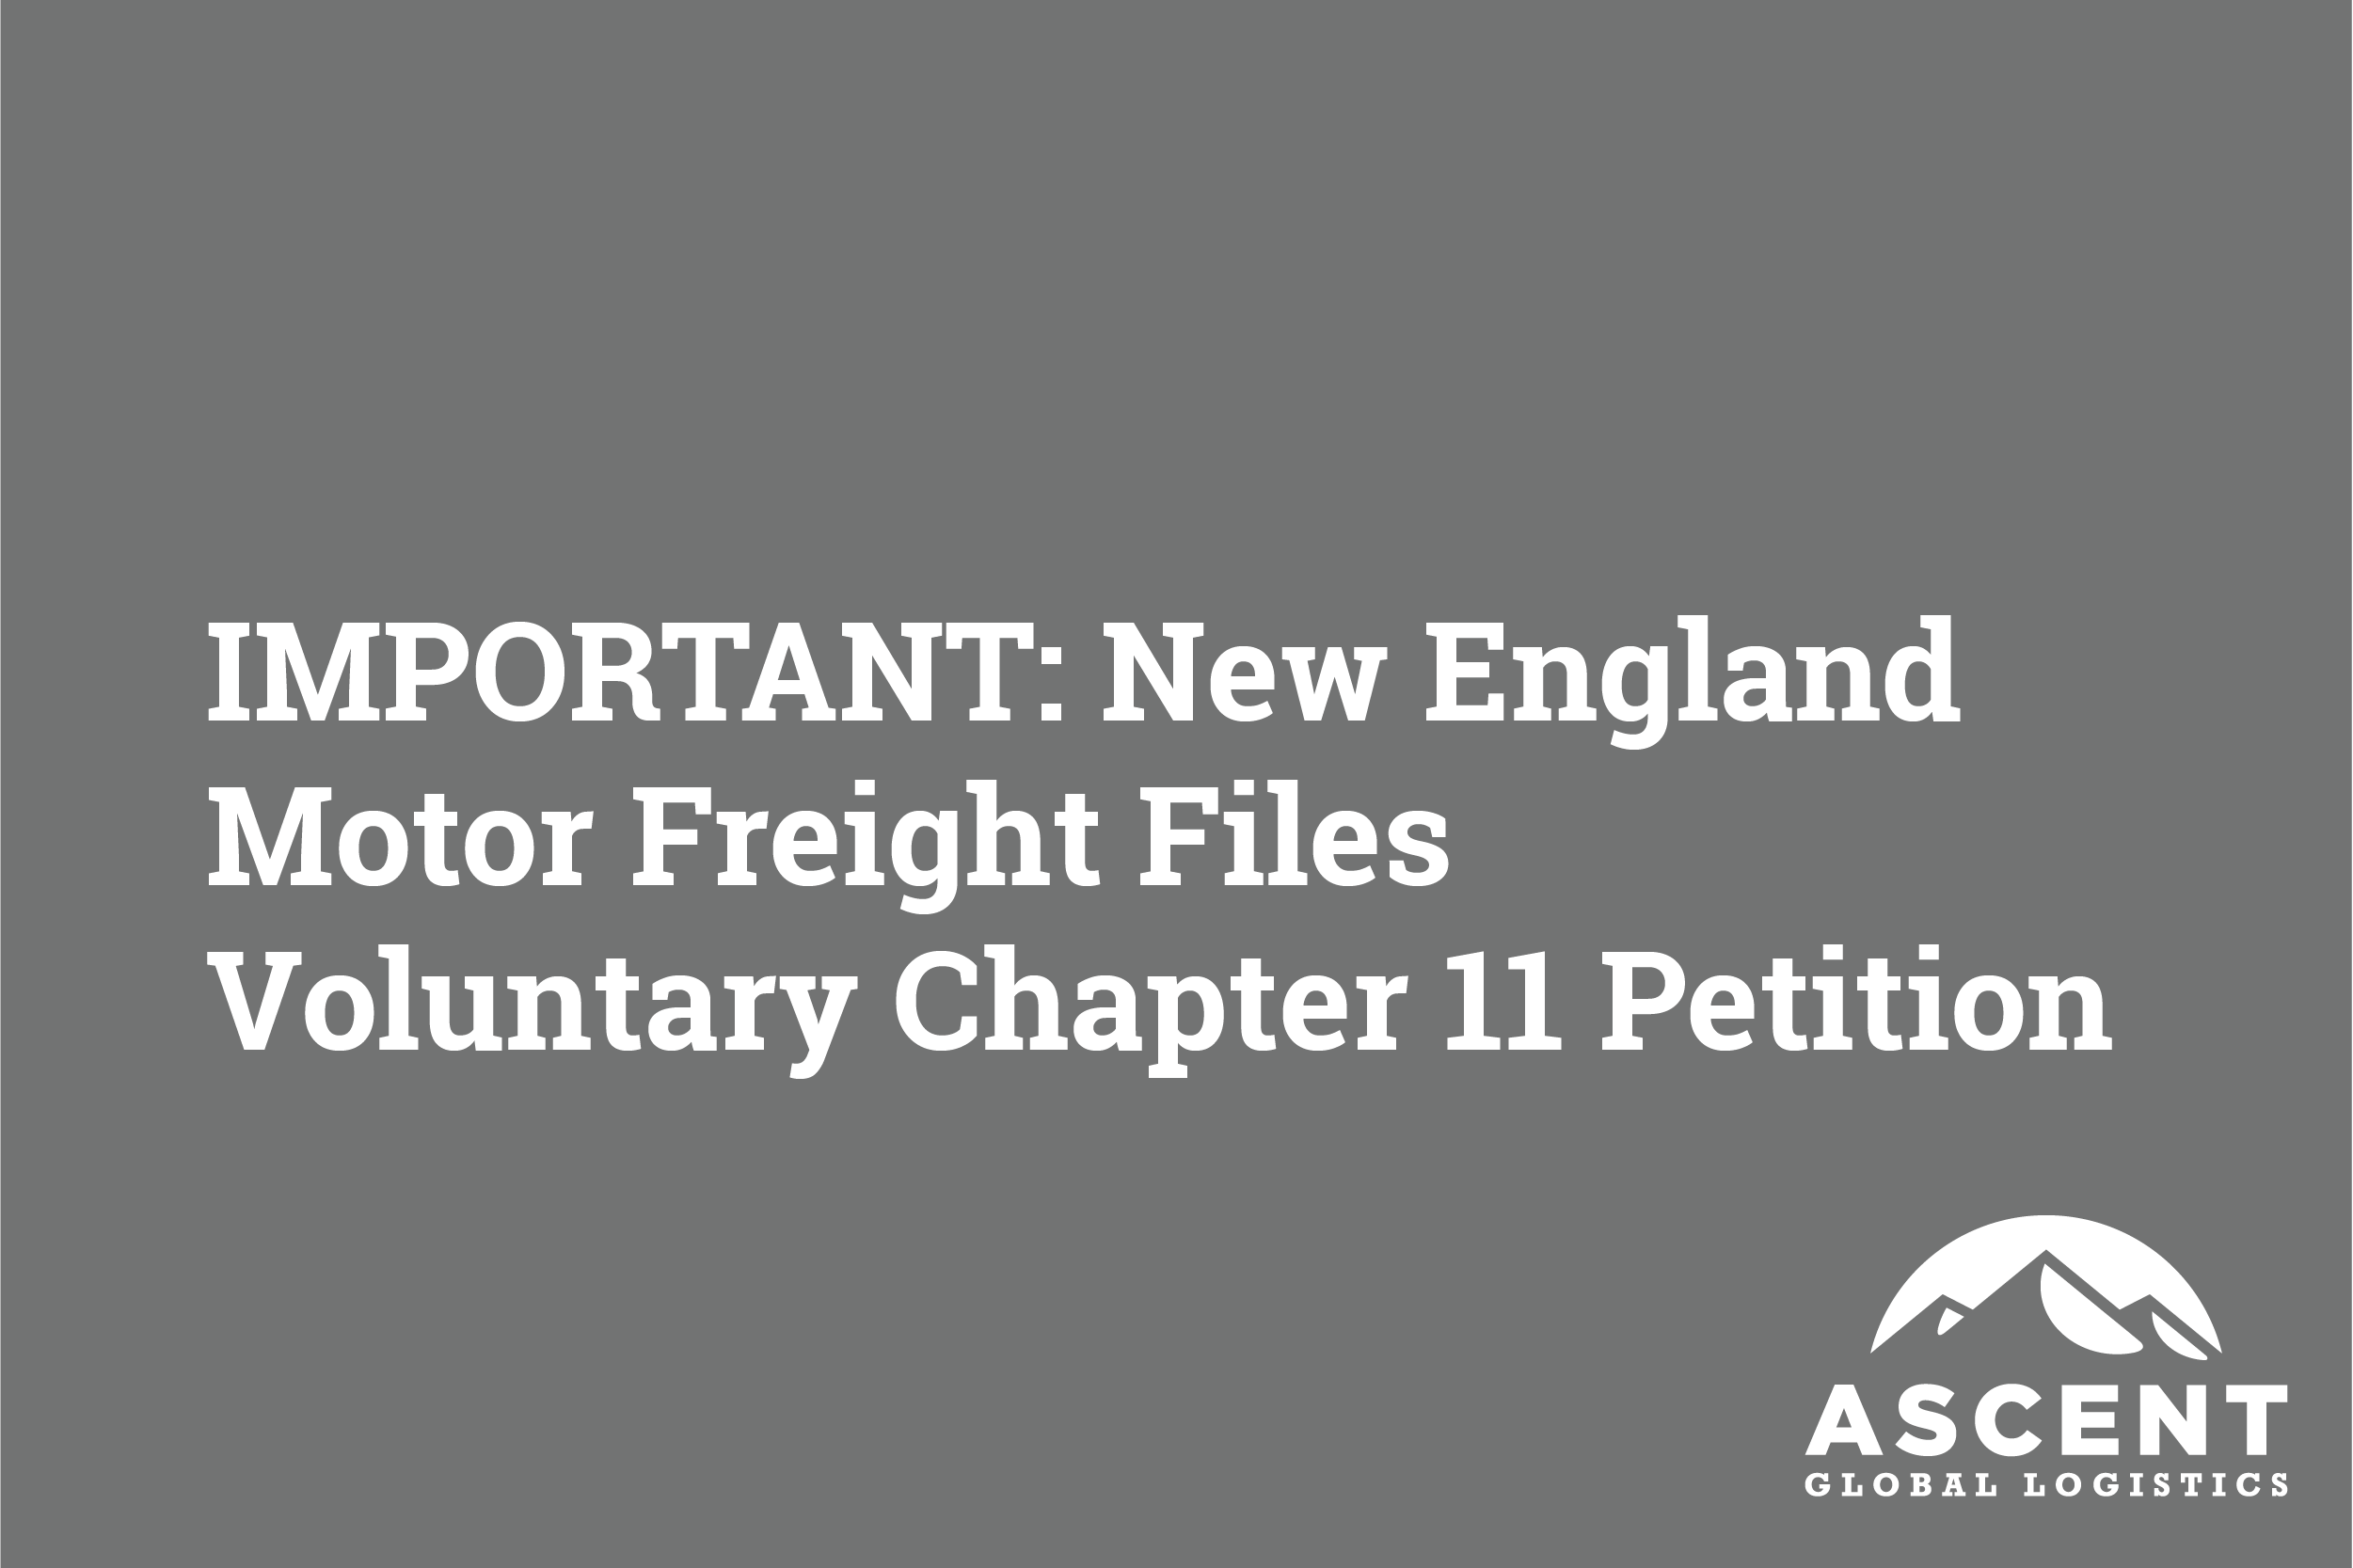 Nemf Logo - IMPORTANT: New England Motor Freight Files Voluntary Chapter 11 Petition